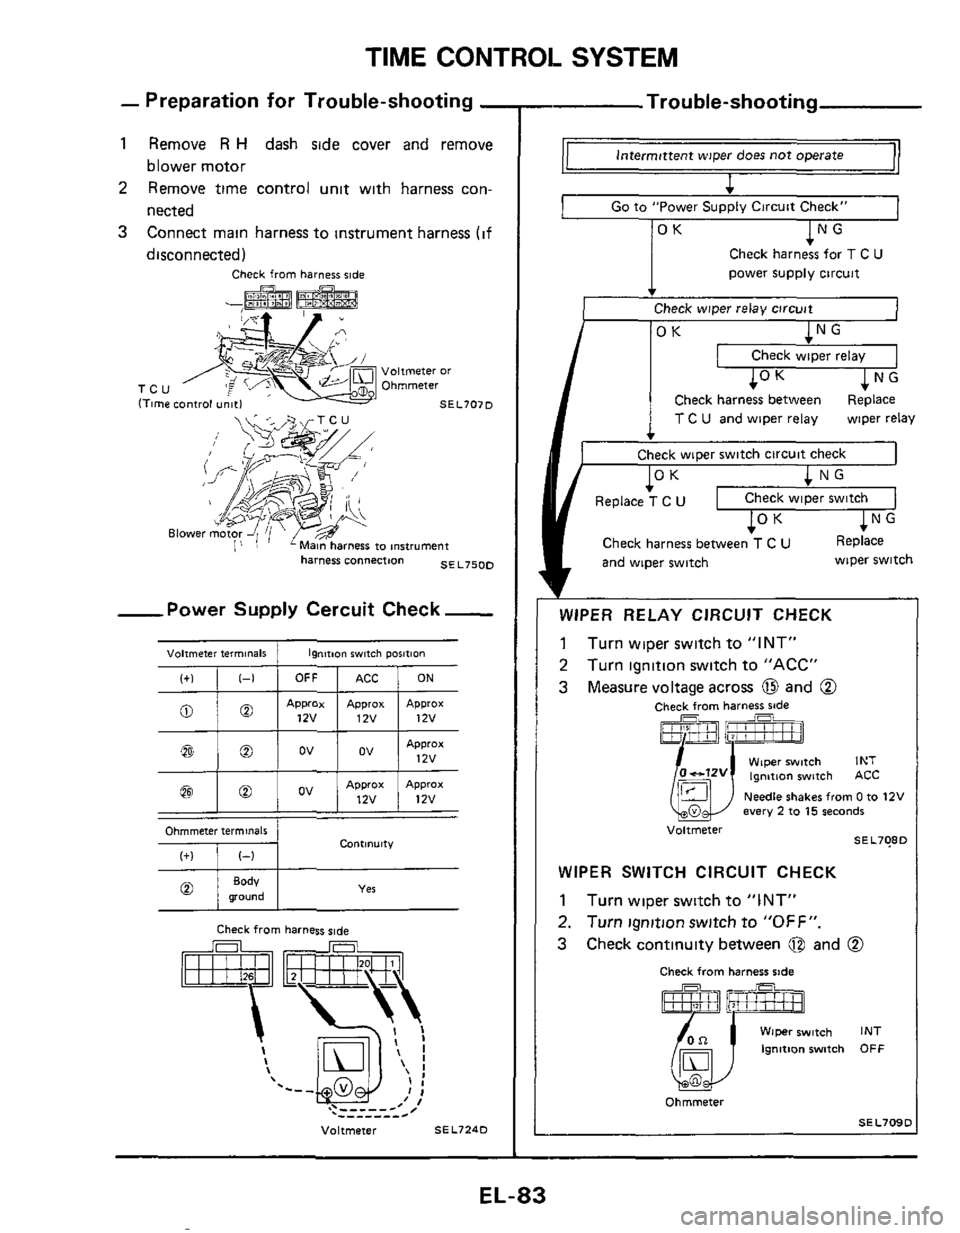 NISSAN 300ZX 1984 Z31 Electrical System Workshop Manual TIME CONTROL SYSTEM 
Volwnetei terminals 
- Preparation for Trouble-shooting - 
1 Remove R H dash side cover and remove 
blower  motor 
2 Remove  time control  unit with  harness  con- 
nected 
3 Conn